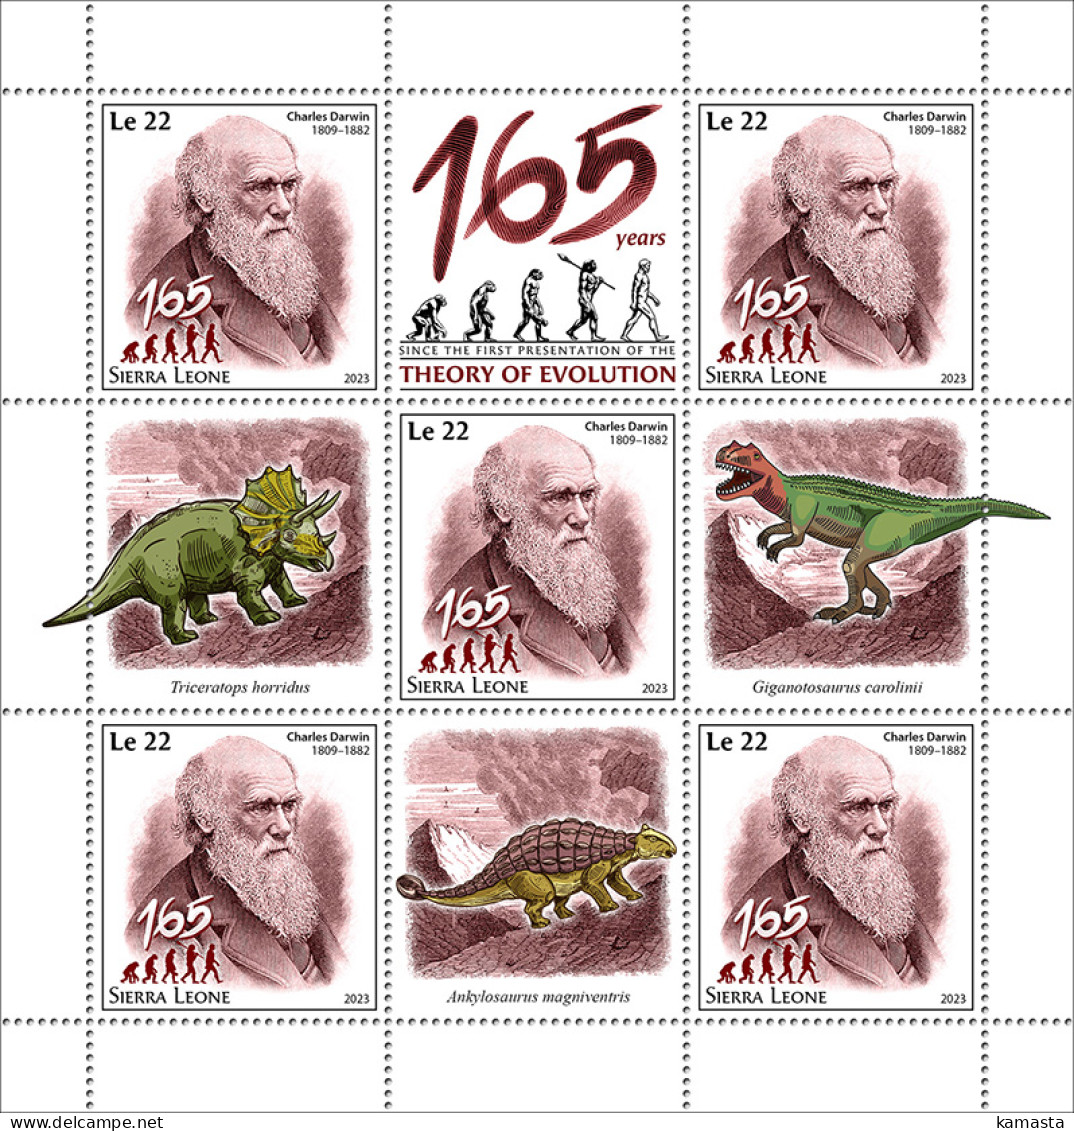 Sierra Leone 2023 165 Years Since The First Publication Of The Theory Of Evolution. (335) OFFICIAL ISSUE - Natur